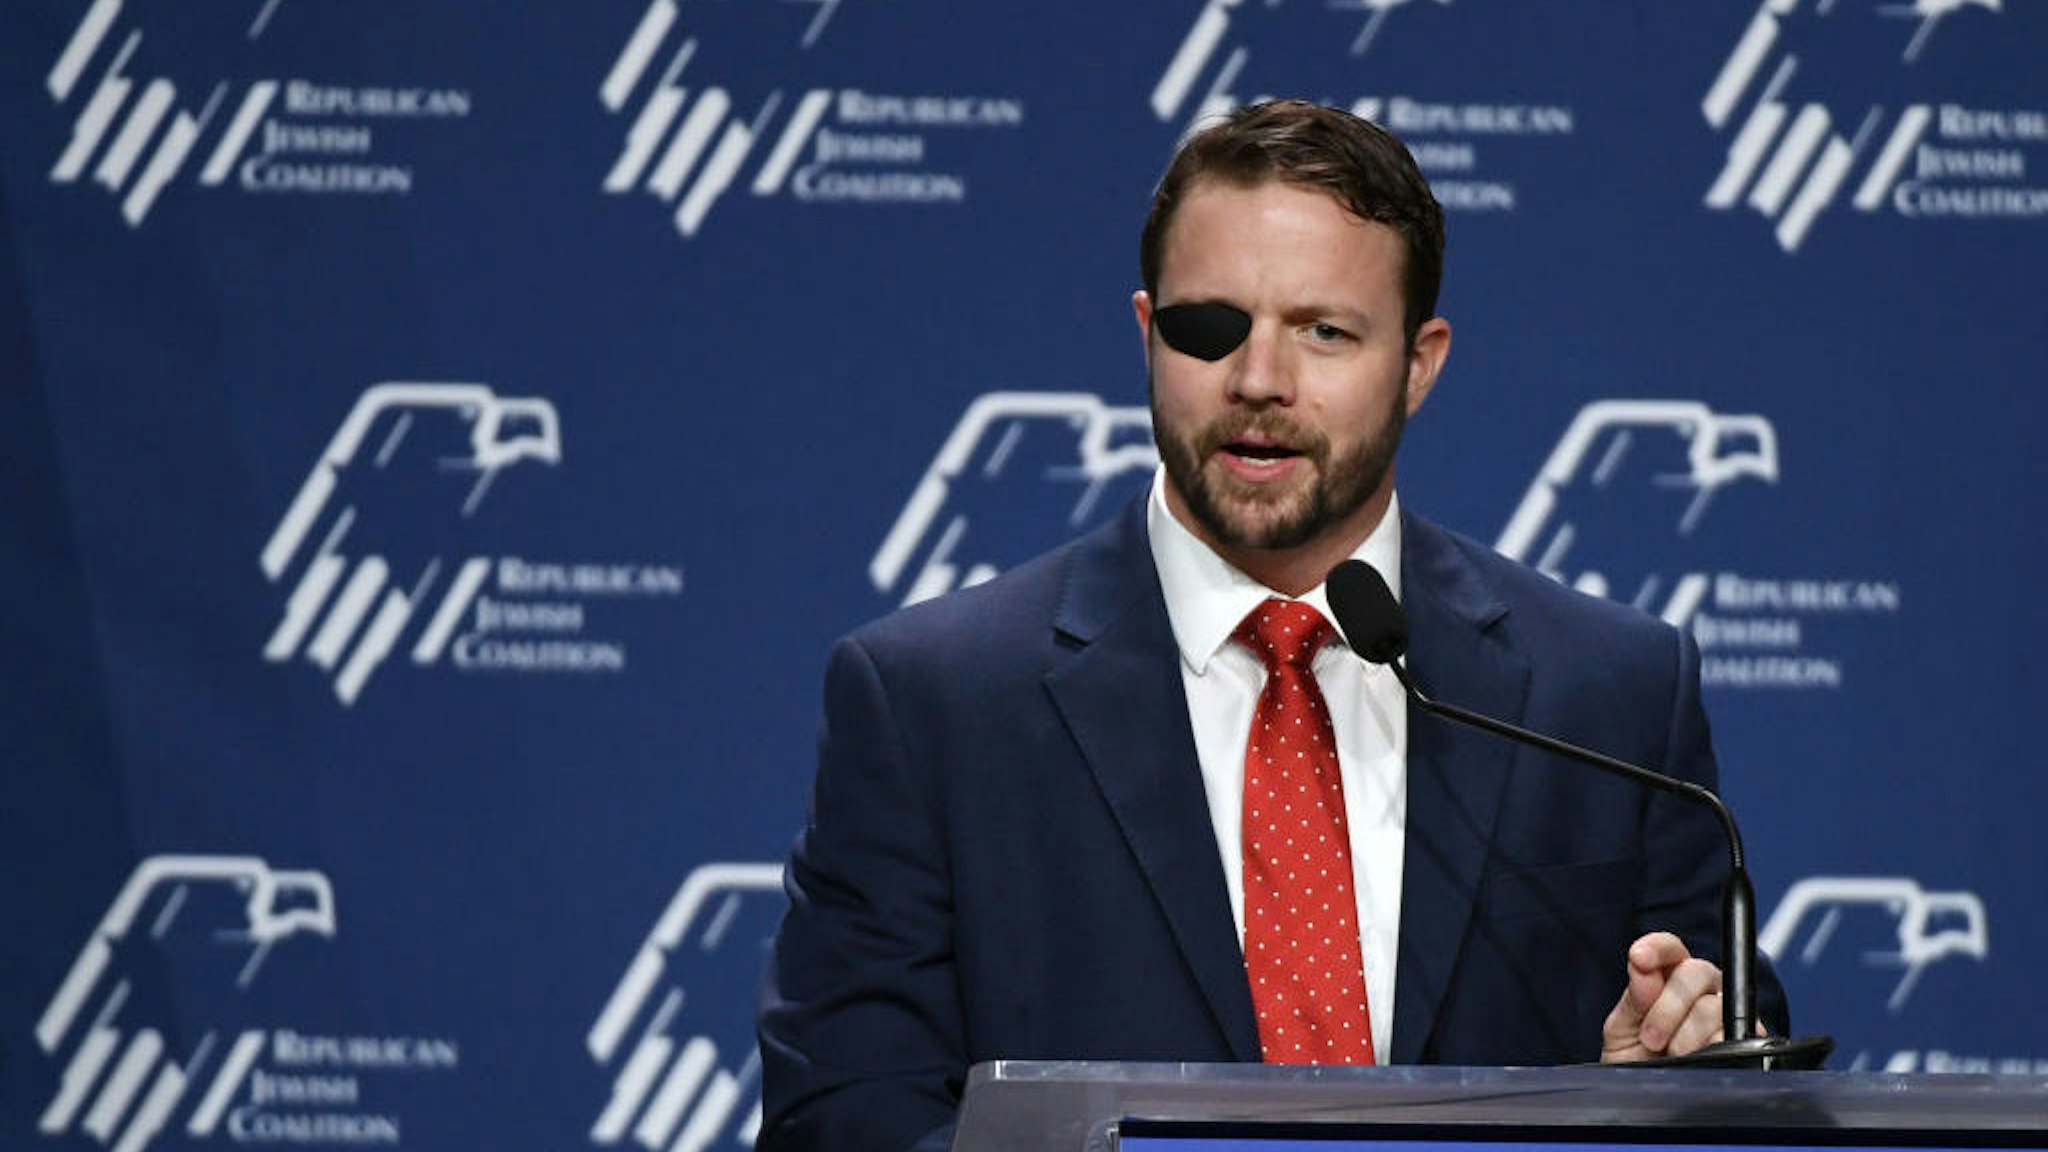 LAS VEGAS, NEVADA - APRIL 06: U.S. Rep. Dan Crenshaw (R-TX) speaks at the Republican Jewish Coalition's annual leadership meeting at The Venetian Las Vegas after appearances by U.S. President Donald Trump and Vice President Mike Pence on April 6, 2019 in Las Vegas, Nevada. Trump has cited his moving of the U.S. embassy in Israel to Jerusalem and his decision to pull the U.S. out of the Iran nuclear deal as reasons for Jewish voters to leave the Democratic party and support him and the GOP instead. (Photo by Ethan Miller/Getty Images)